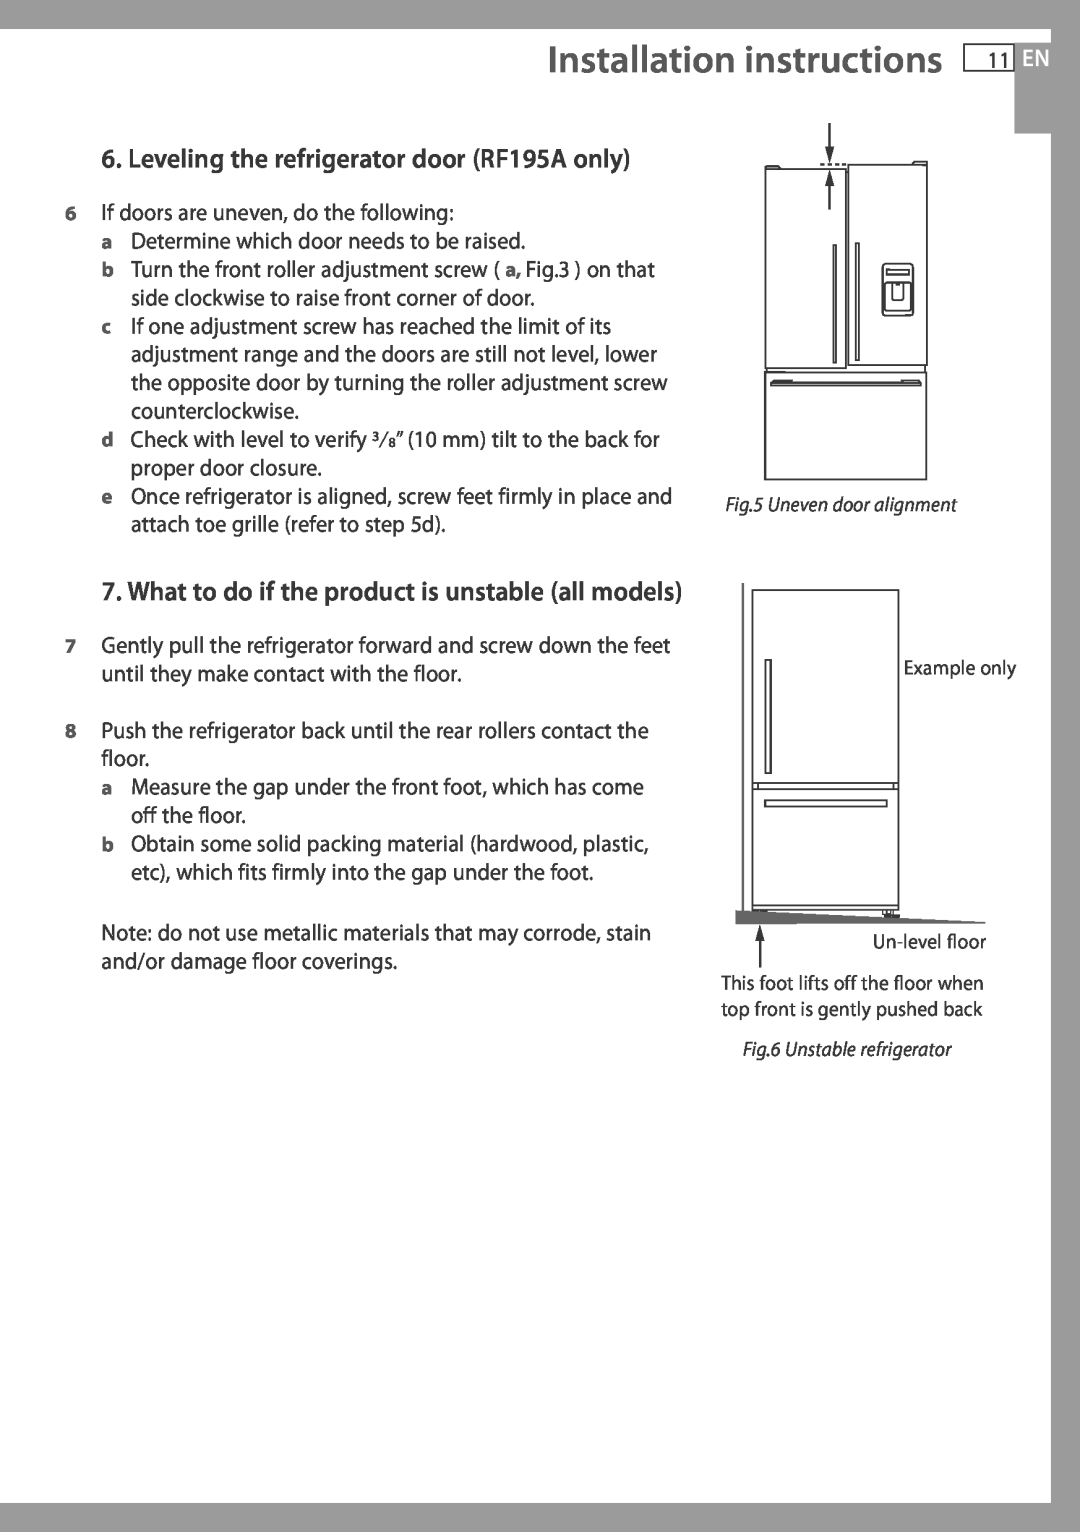 Fisher & Paykel RF175W Installation instructions 11 EN, Leveling the refrigerator door RF195A only 